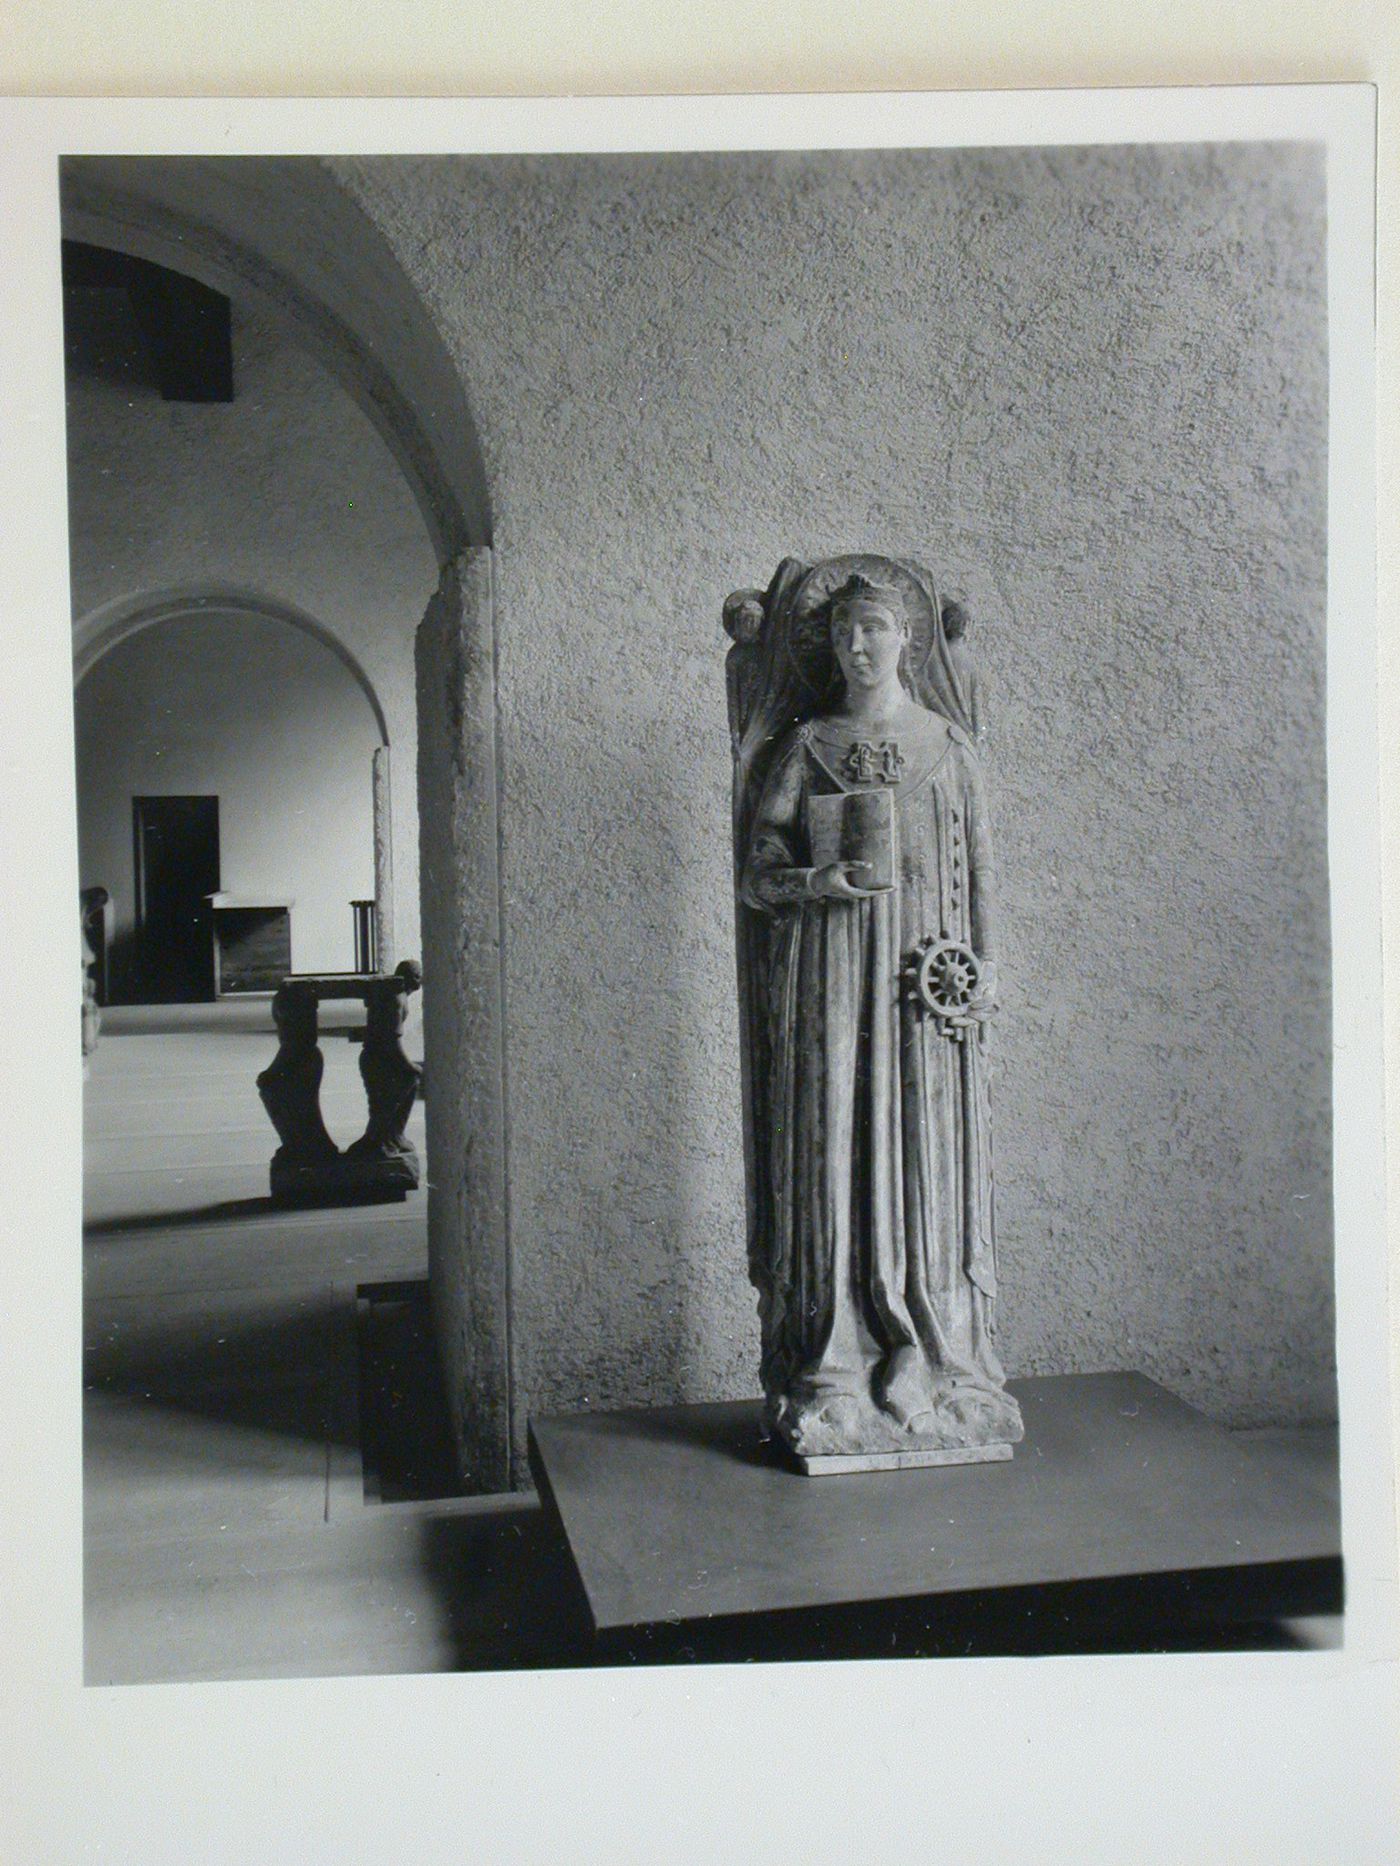 Interior view of a gallery showing a statue with doorways and other galleries on the left, Museo di Castelvecchio, Verona, Italy